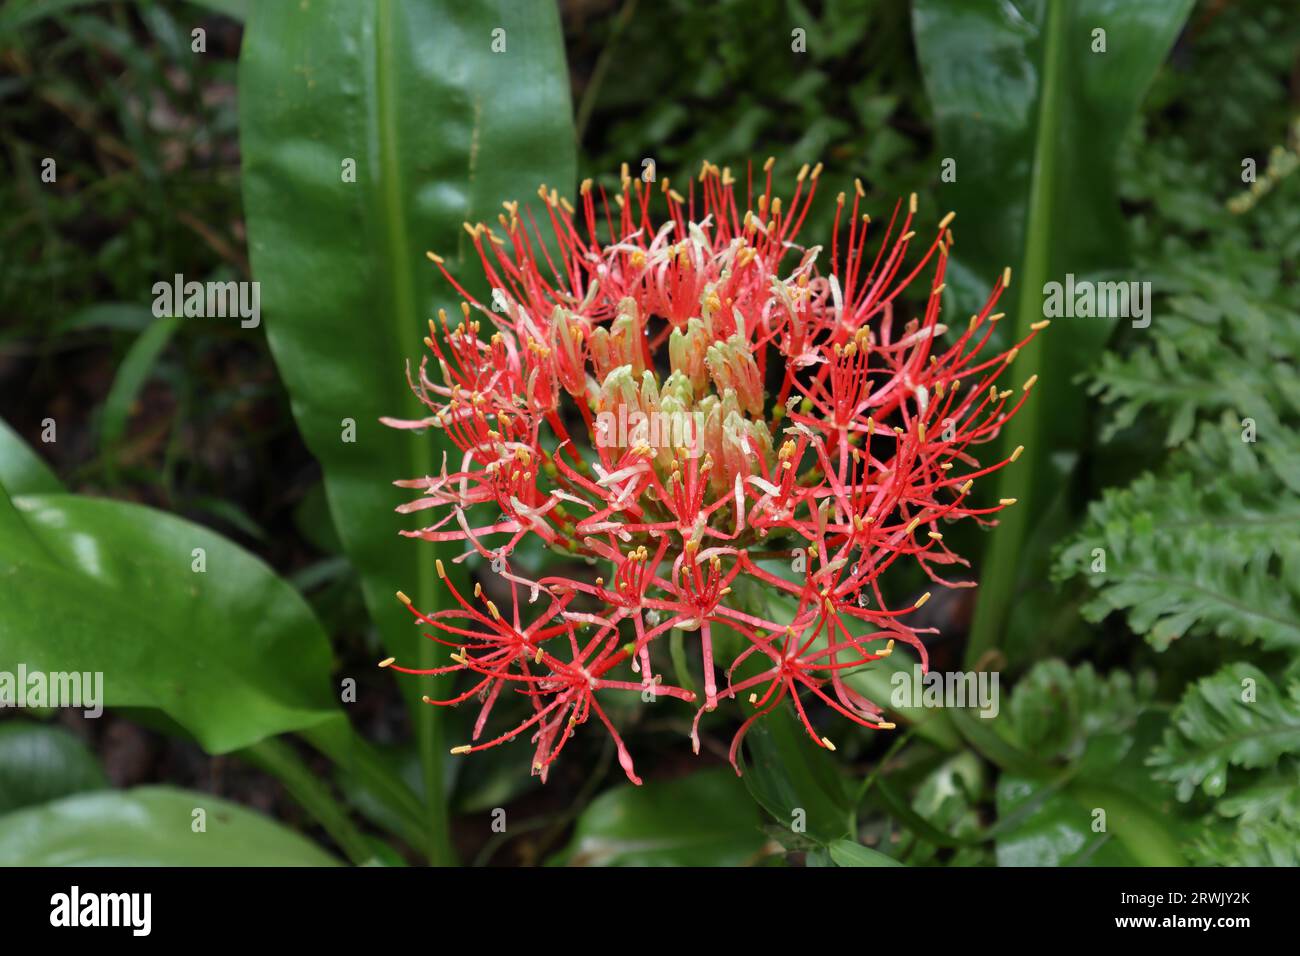 A rain soaked blooming inflorescence of a fireball lily flower (Scadoxus Multiflorus) with the water drops on the thin red petals Stock Photo